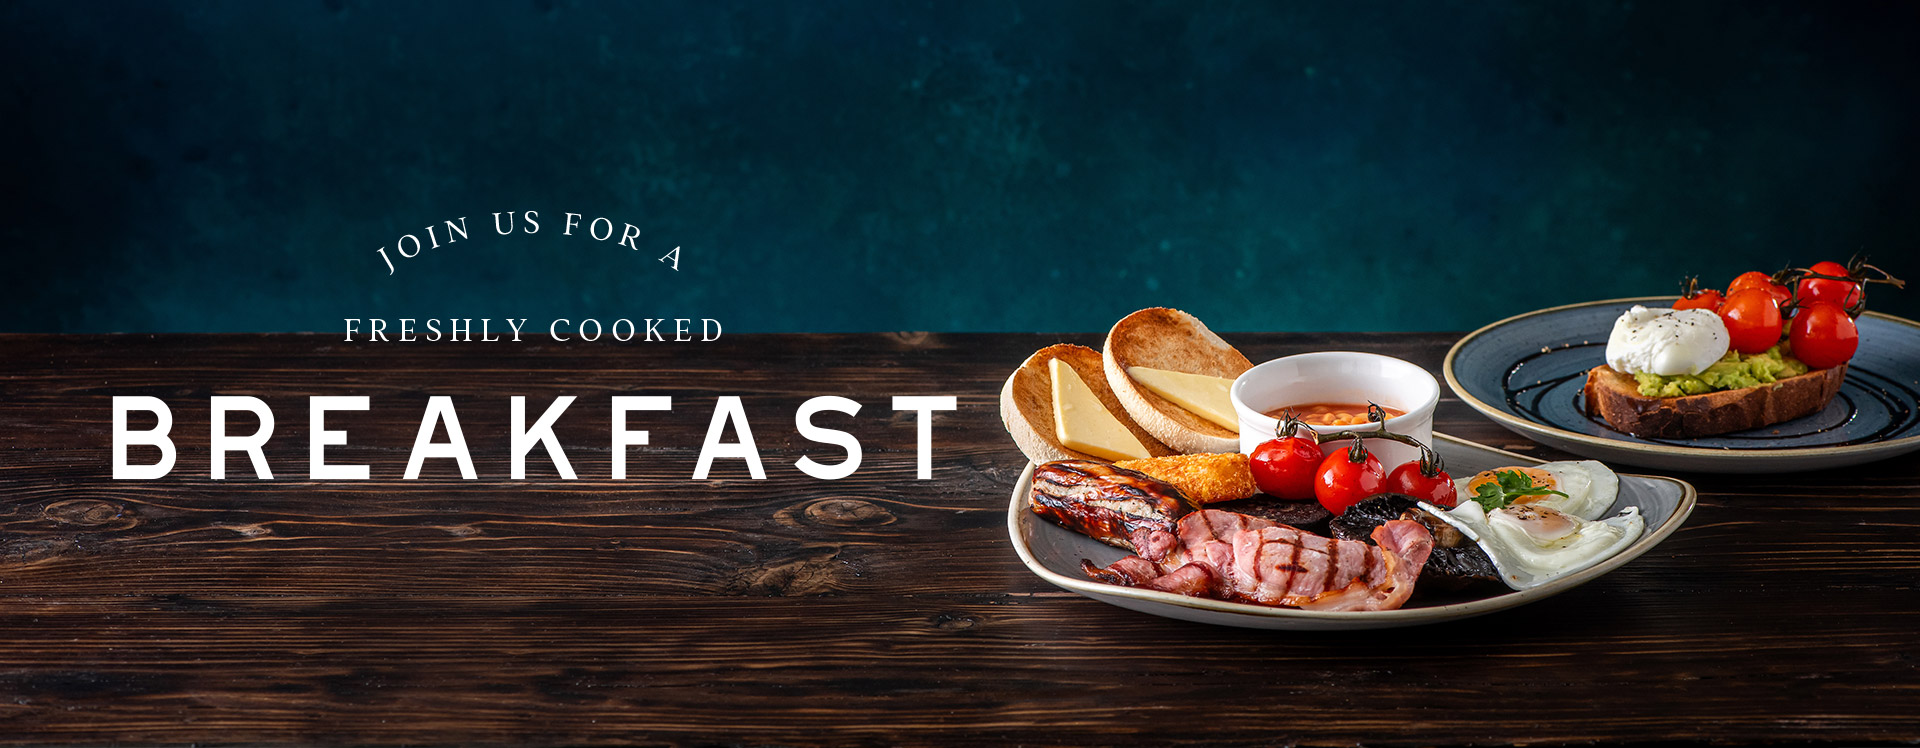 Breakfast at Doggett's Coat and Badge - Book a table